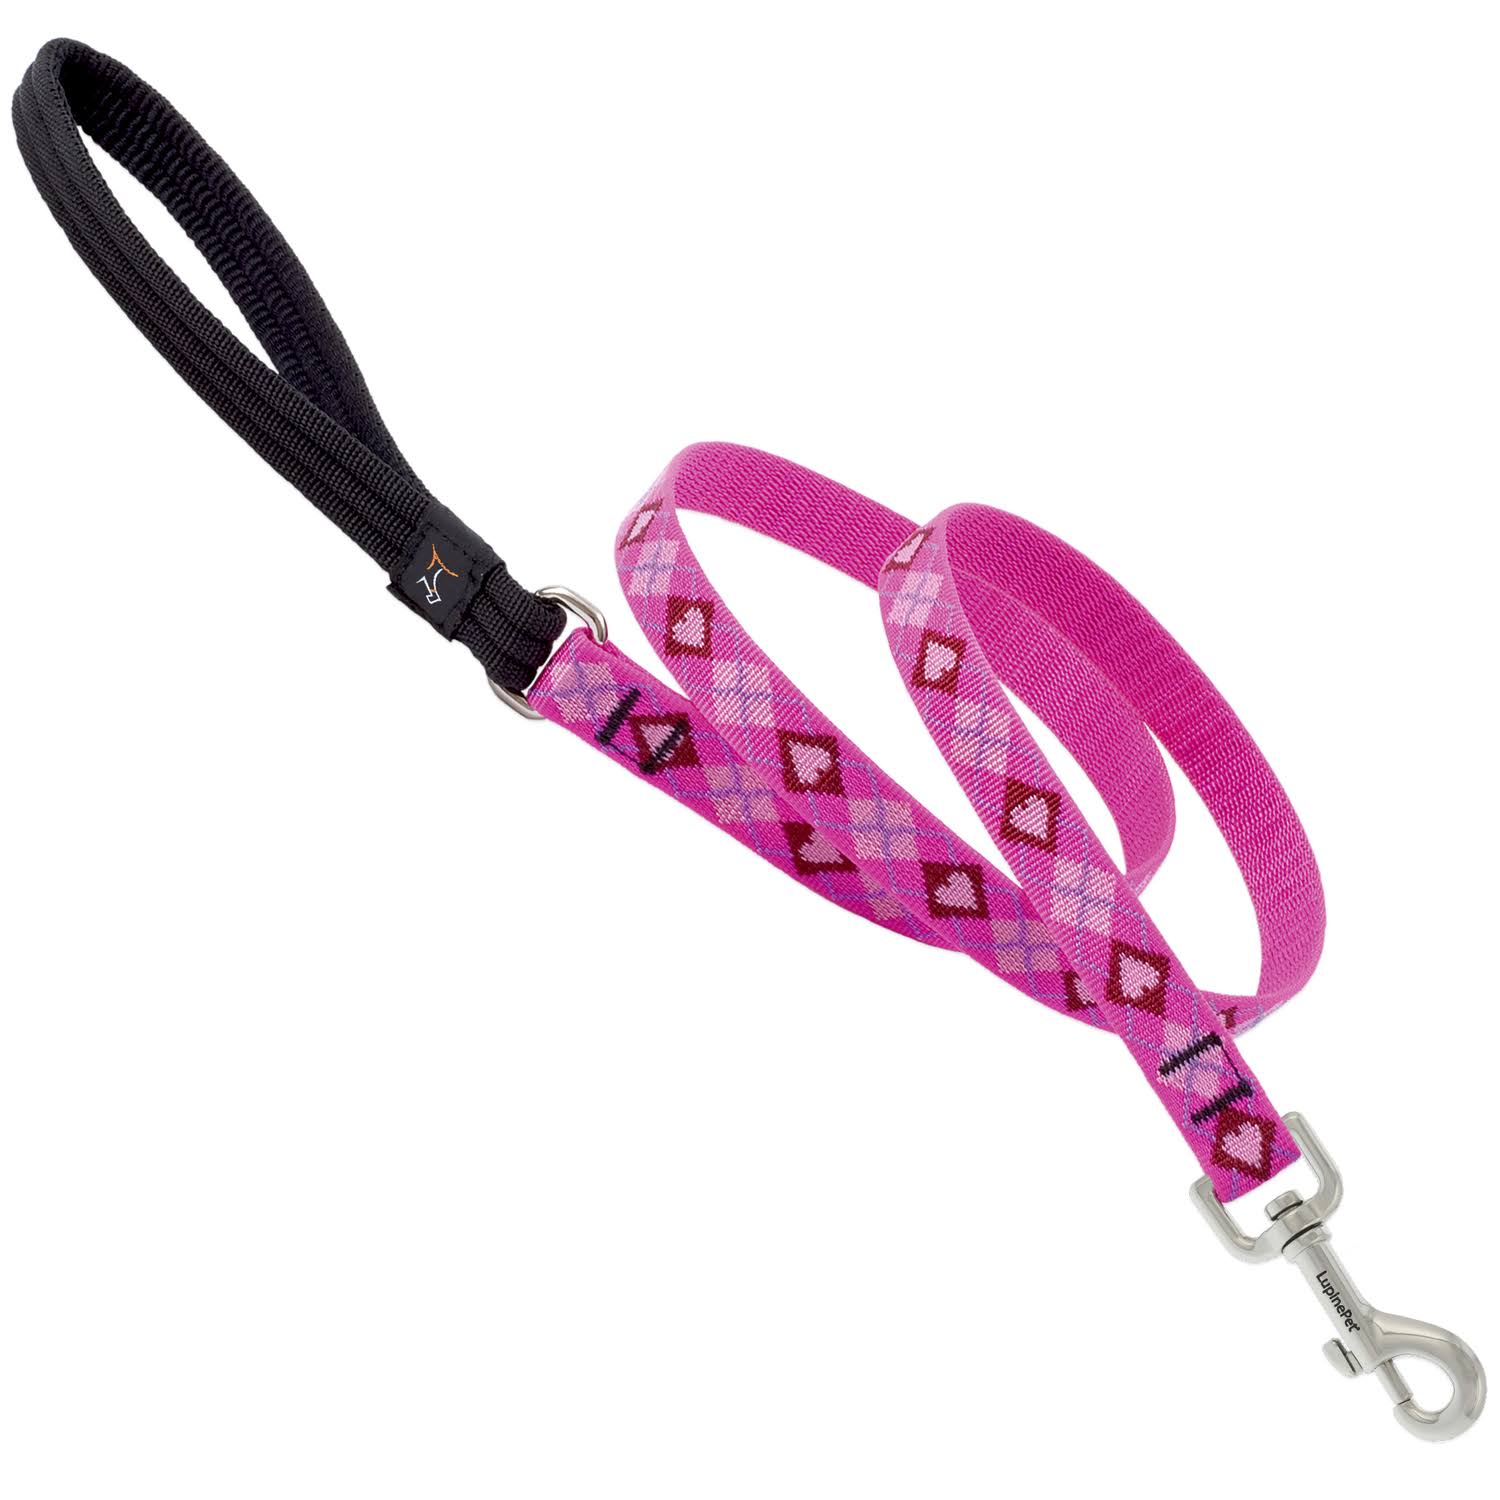 Lupine Puppy Love Patterned Padded Handle Dog Leash - 3/4" x 6'